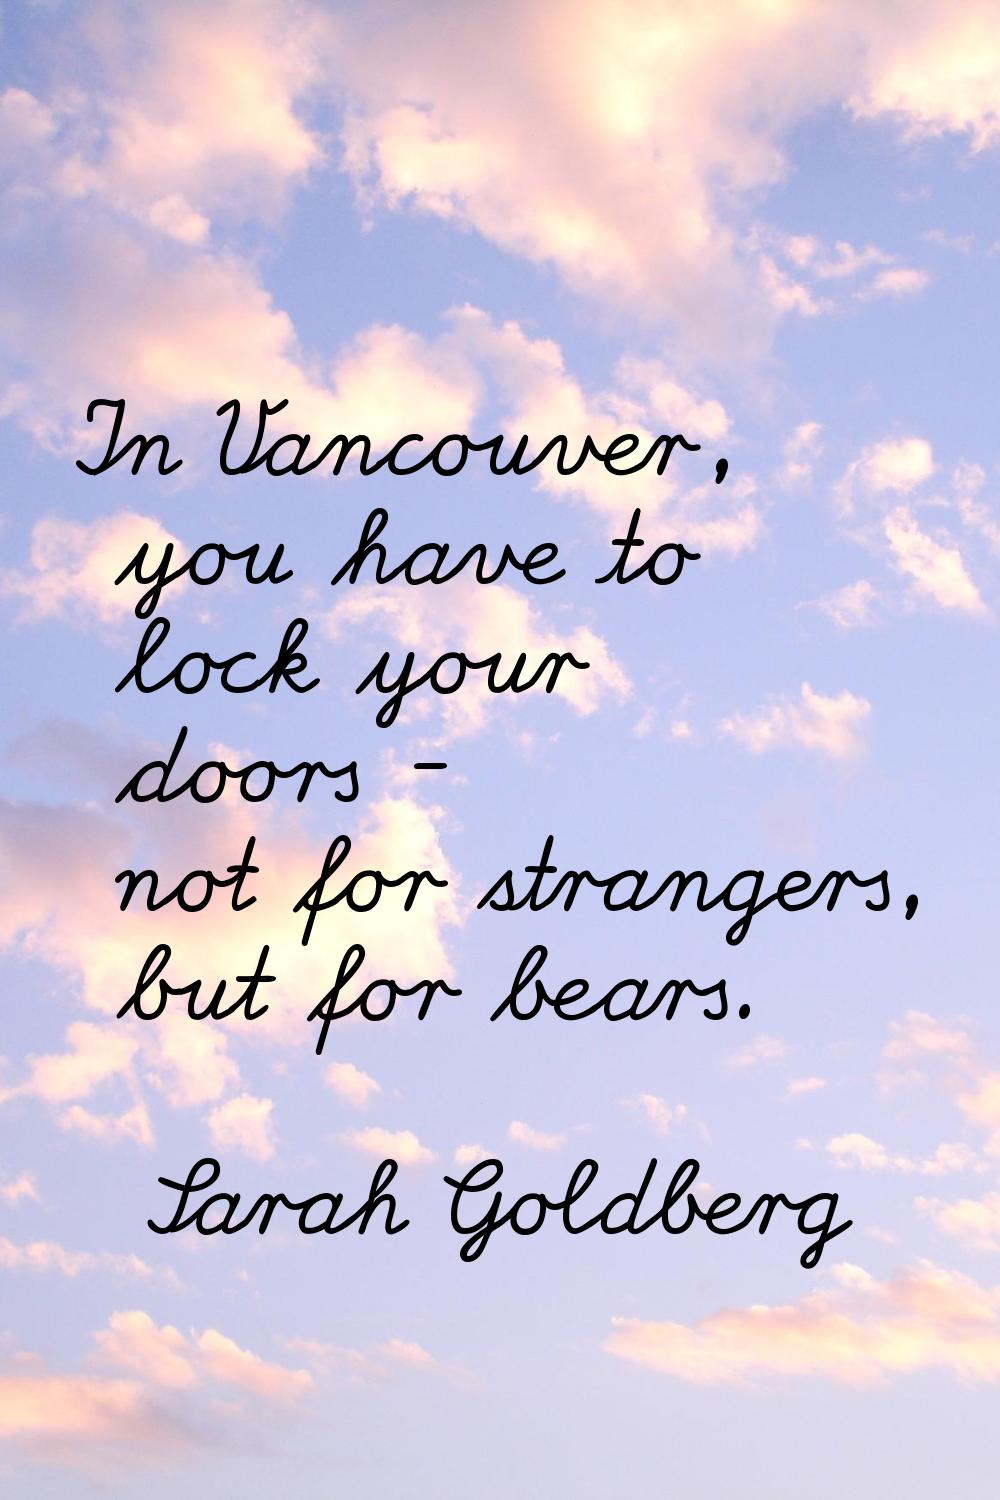 In Vancouver, you have to lock your doors - not for strangers, but for bears.